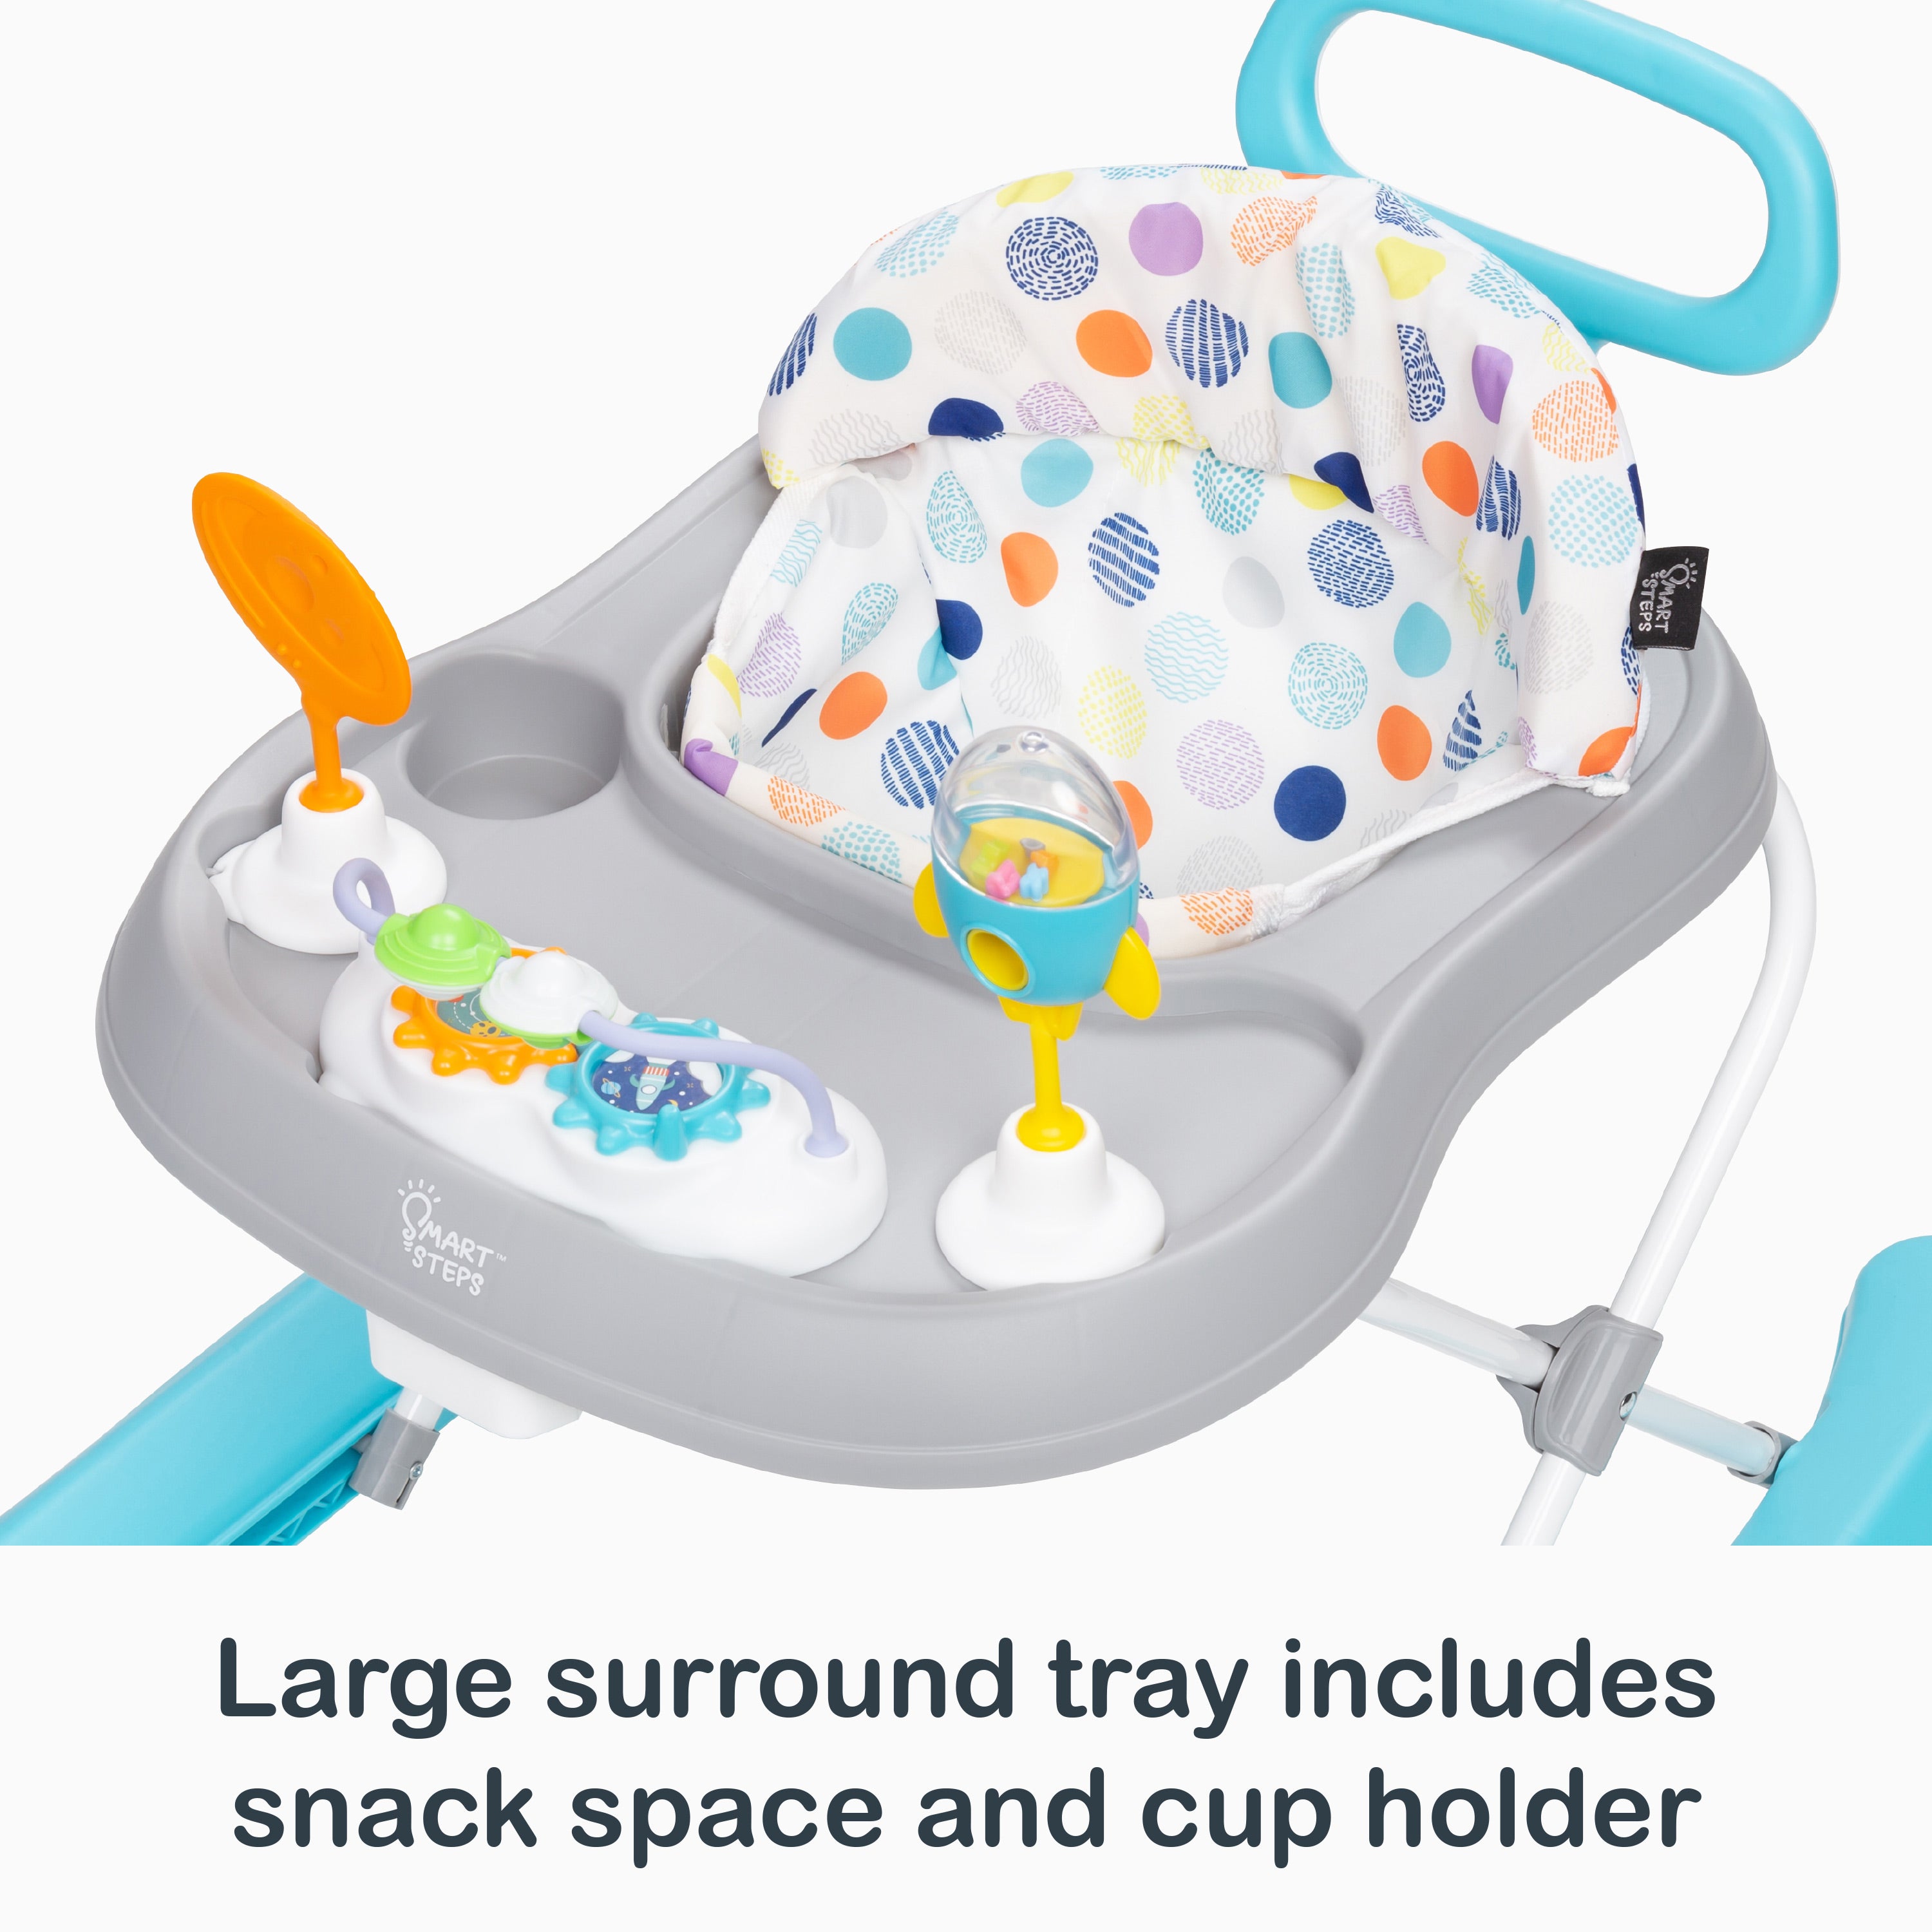 Baby Stap  Products & Pricing